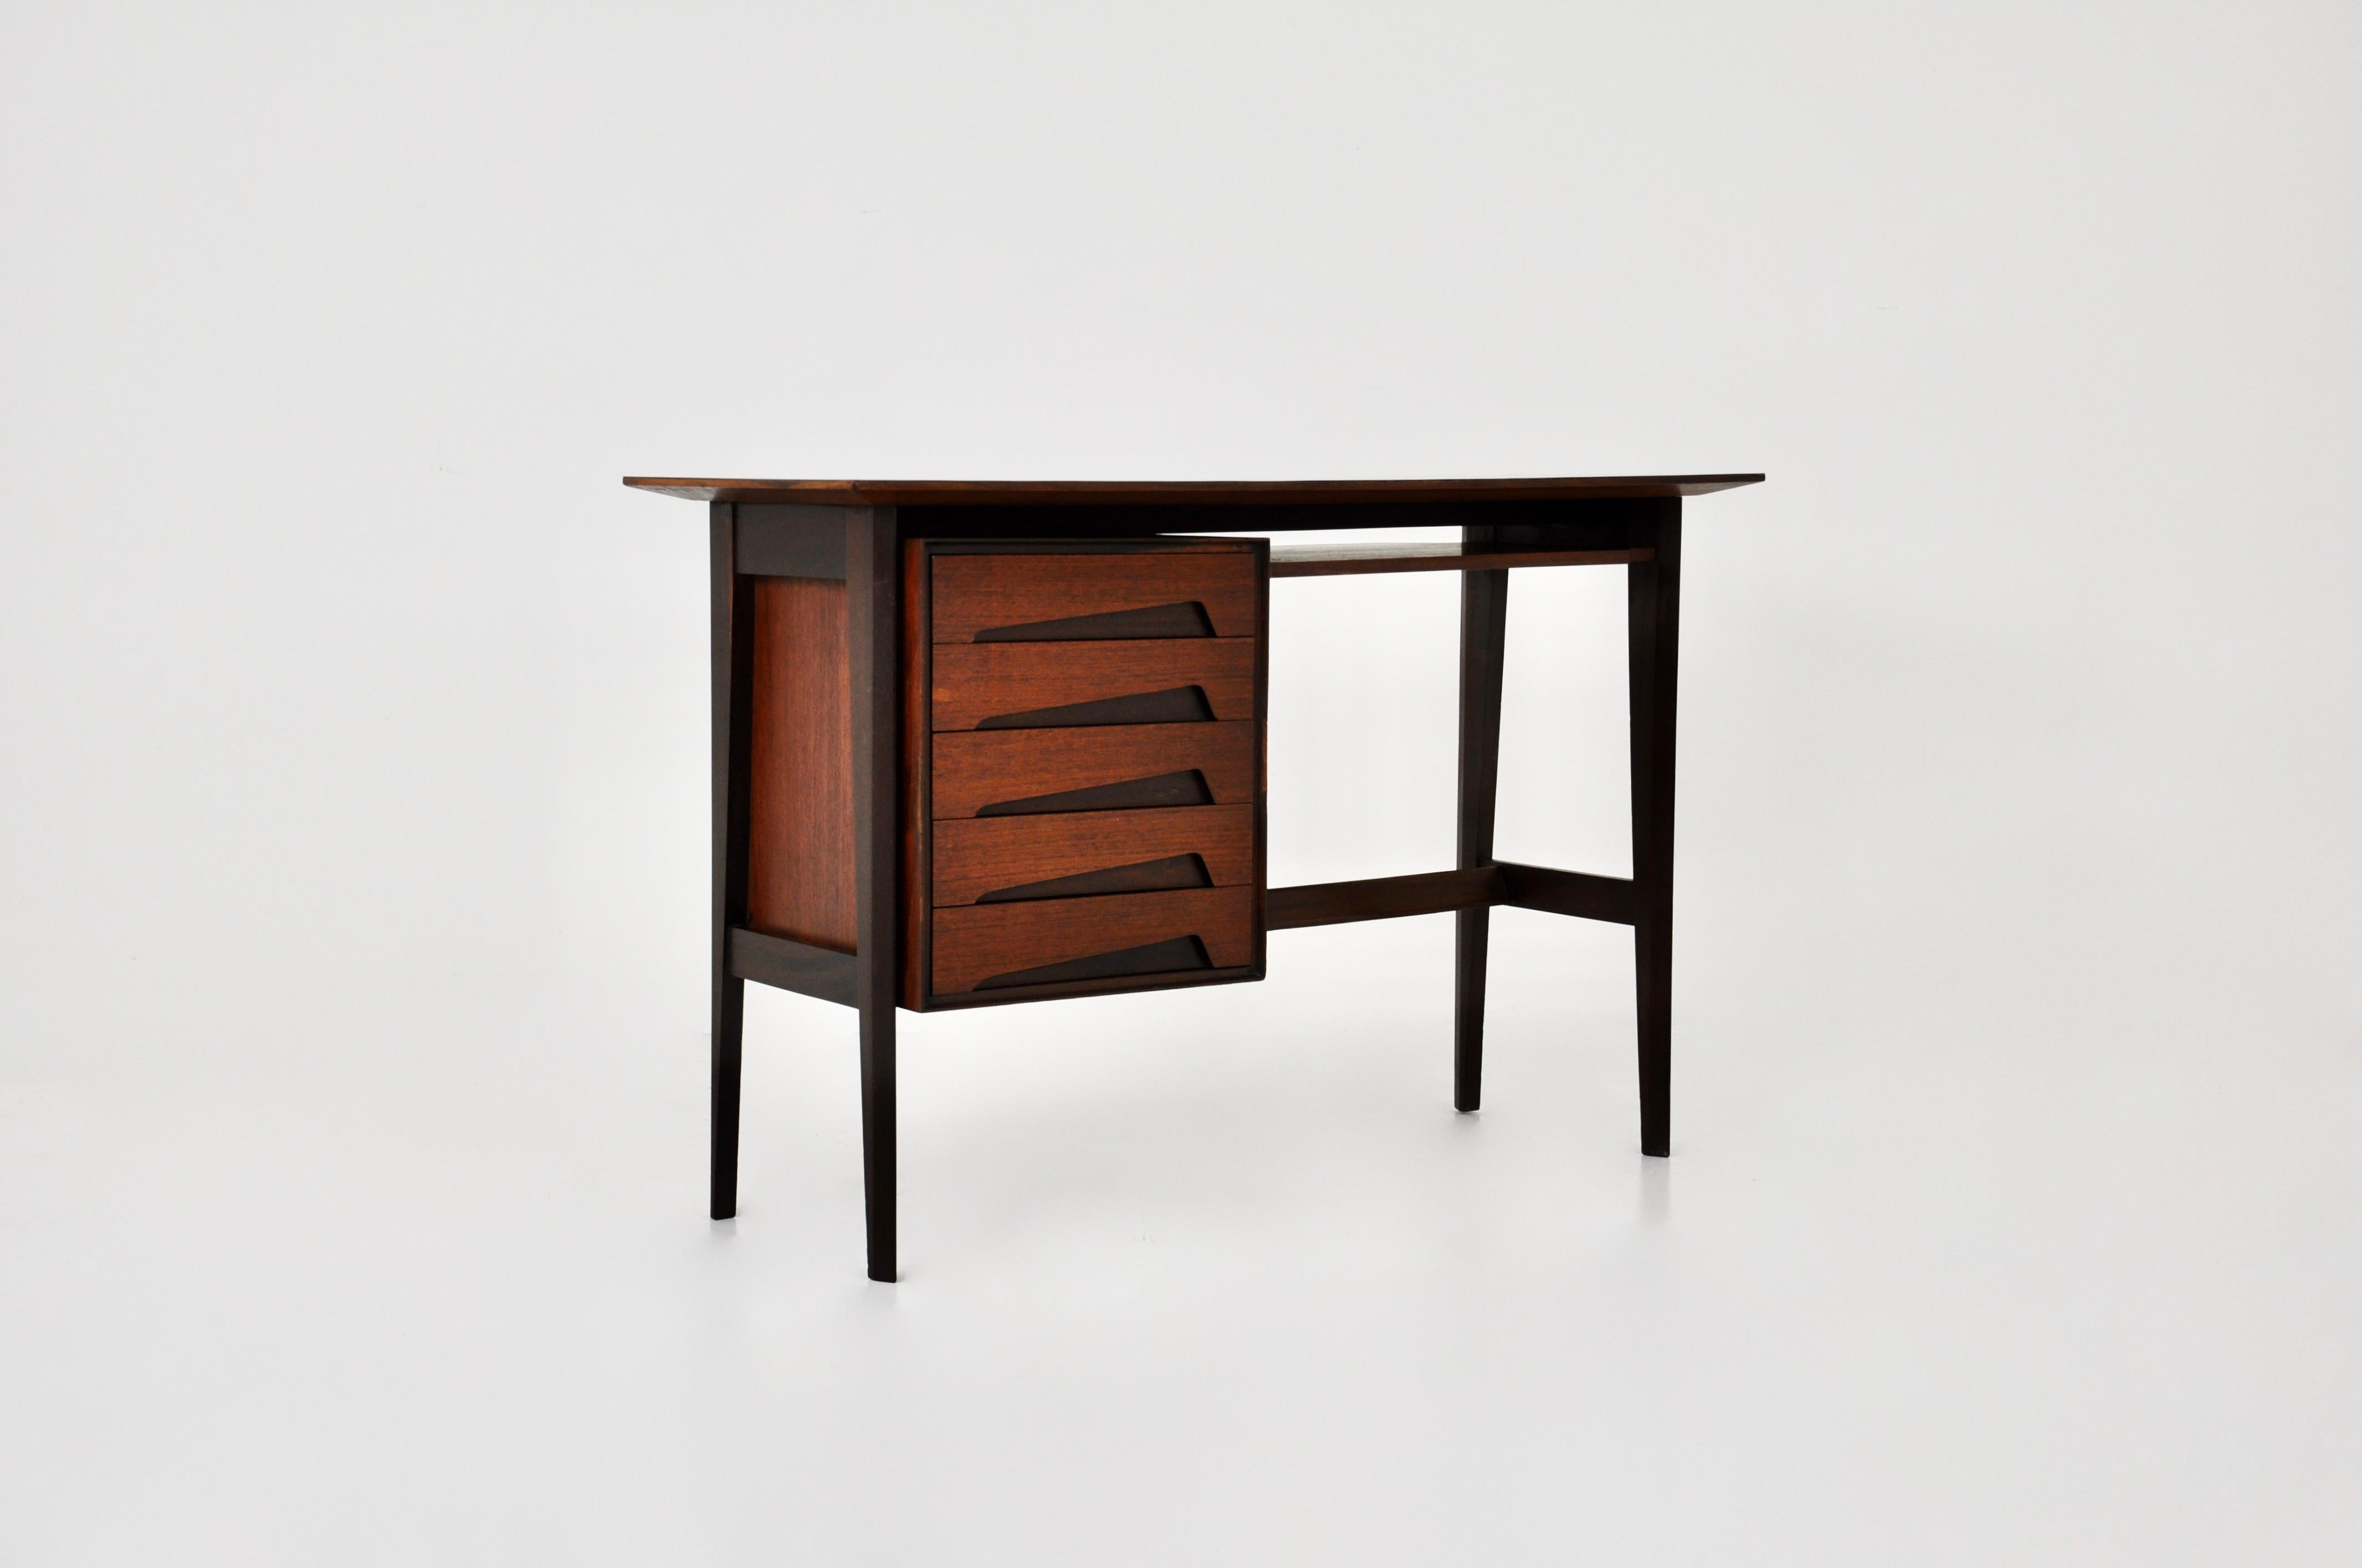 Wooden desk with 5 drawers designed by Edmondo Palutari. Wear due to age and age of the desk.